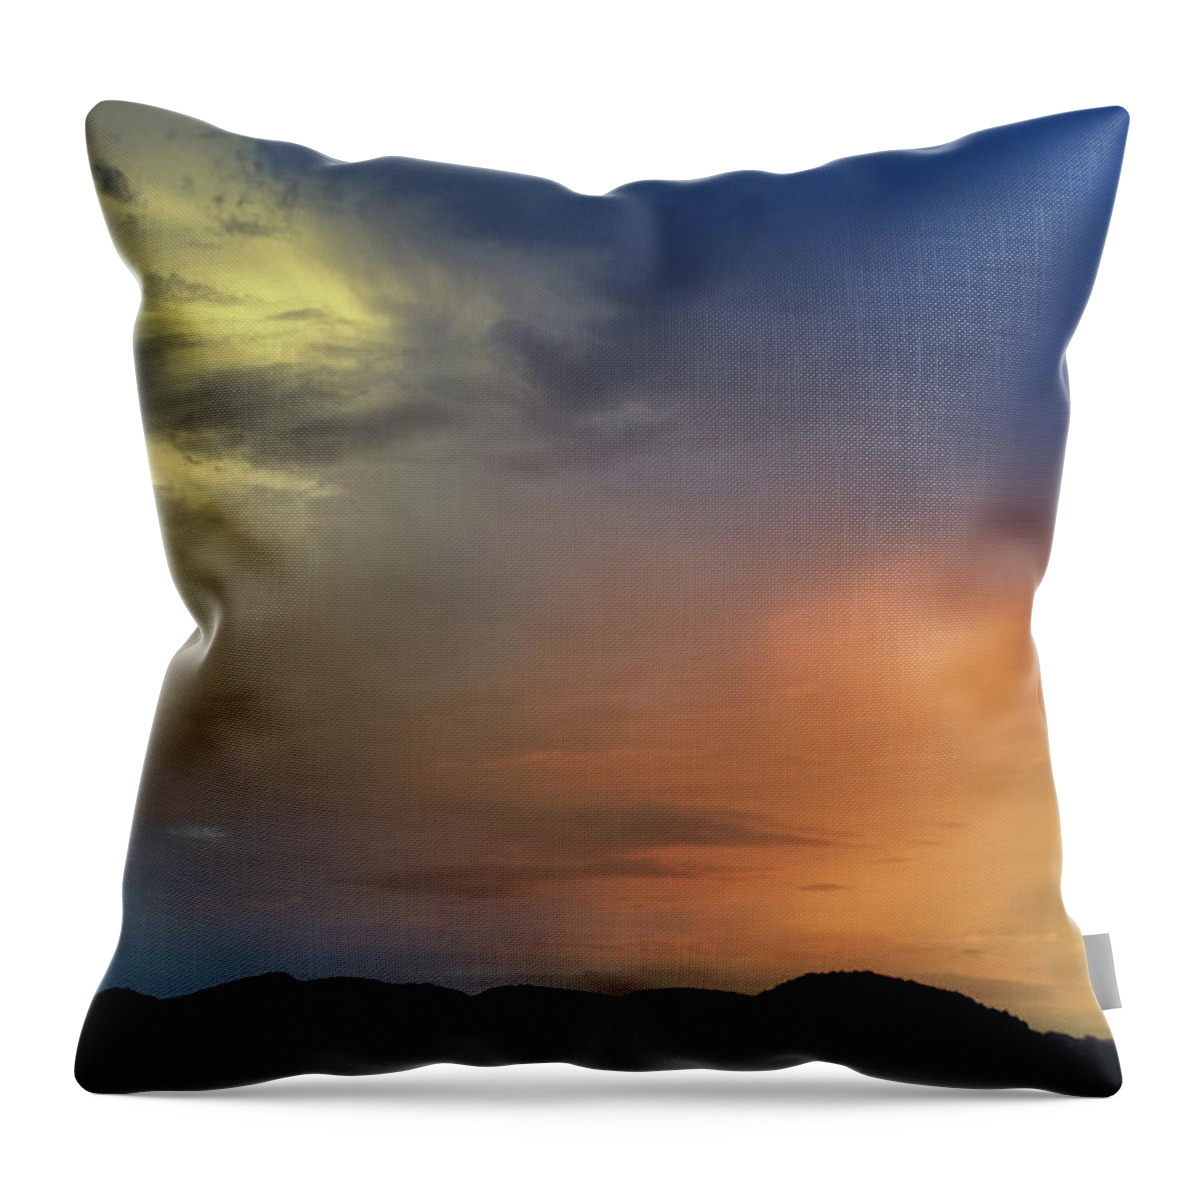 Softness Is The Sunset Throw Pillow featuring the photograph Softness Is The Sunset by Gene Taylor